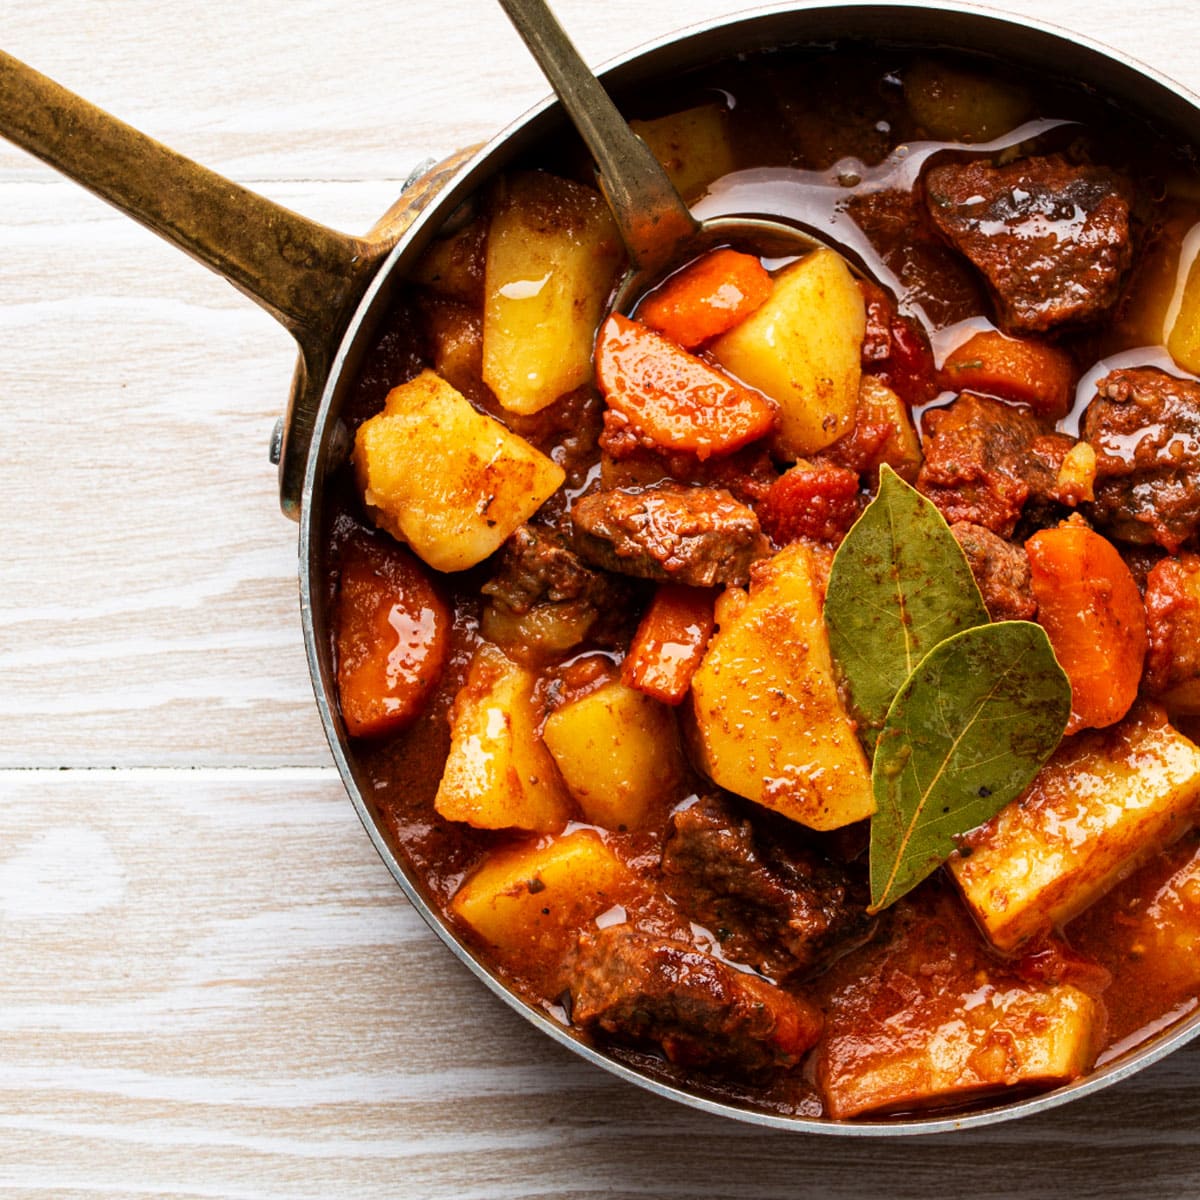 Whether you've made a big batch of beef stew to last you through the week or you bought one from your favorite restaurant, you're probably wondering how long it will stay fresh.